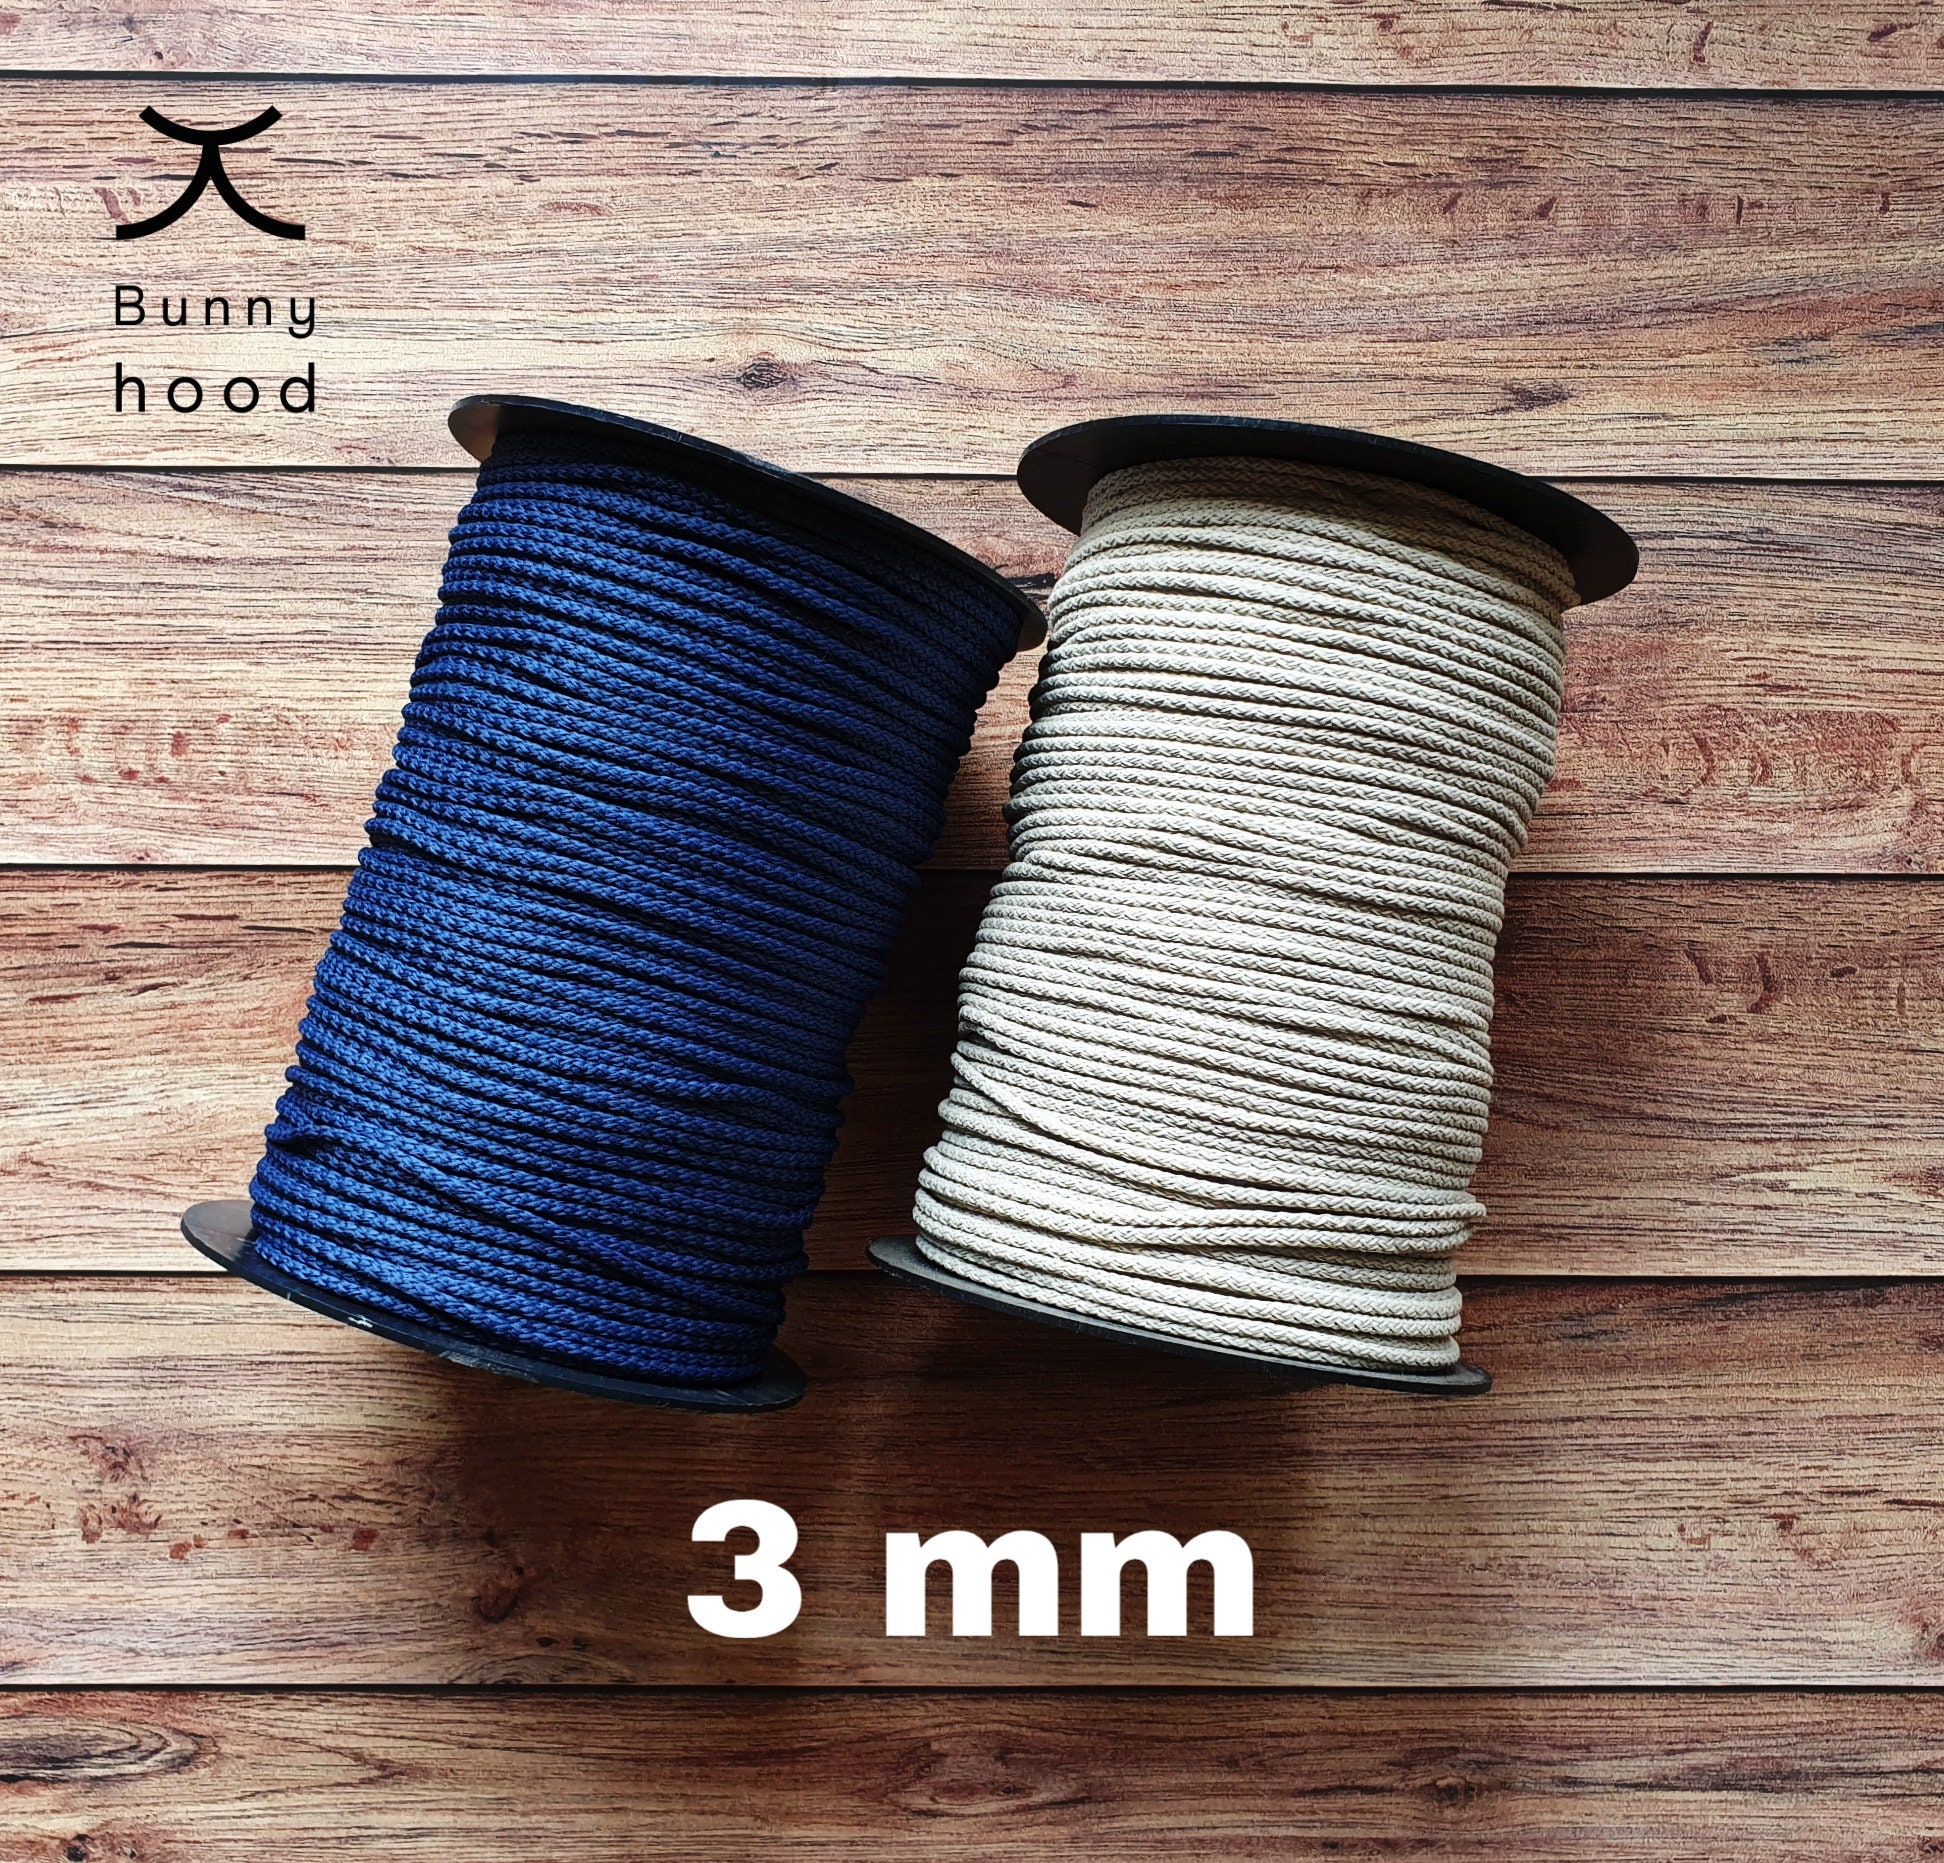 Polyester cord 3 mm with core 200 mts, macramé rope 3 mm, rope for crochet  bag - Shop LunarCat Other - Pinkoi